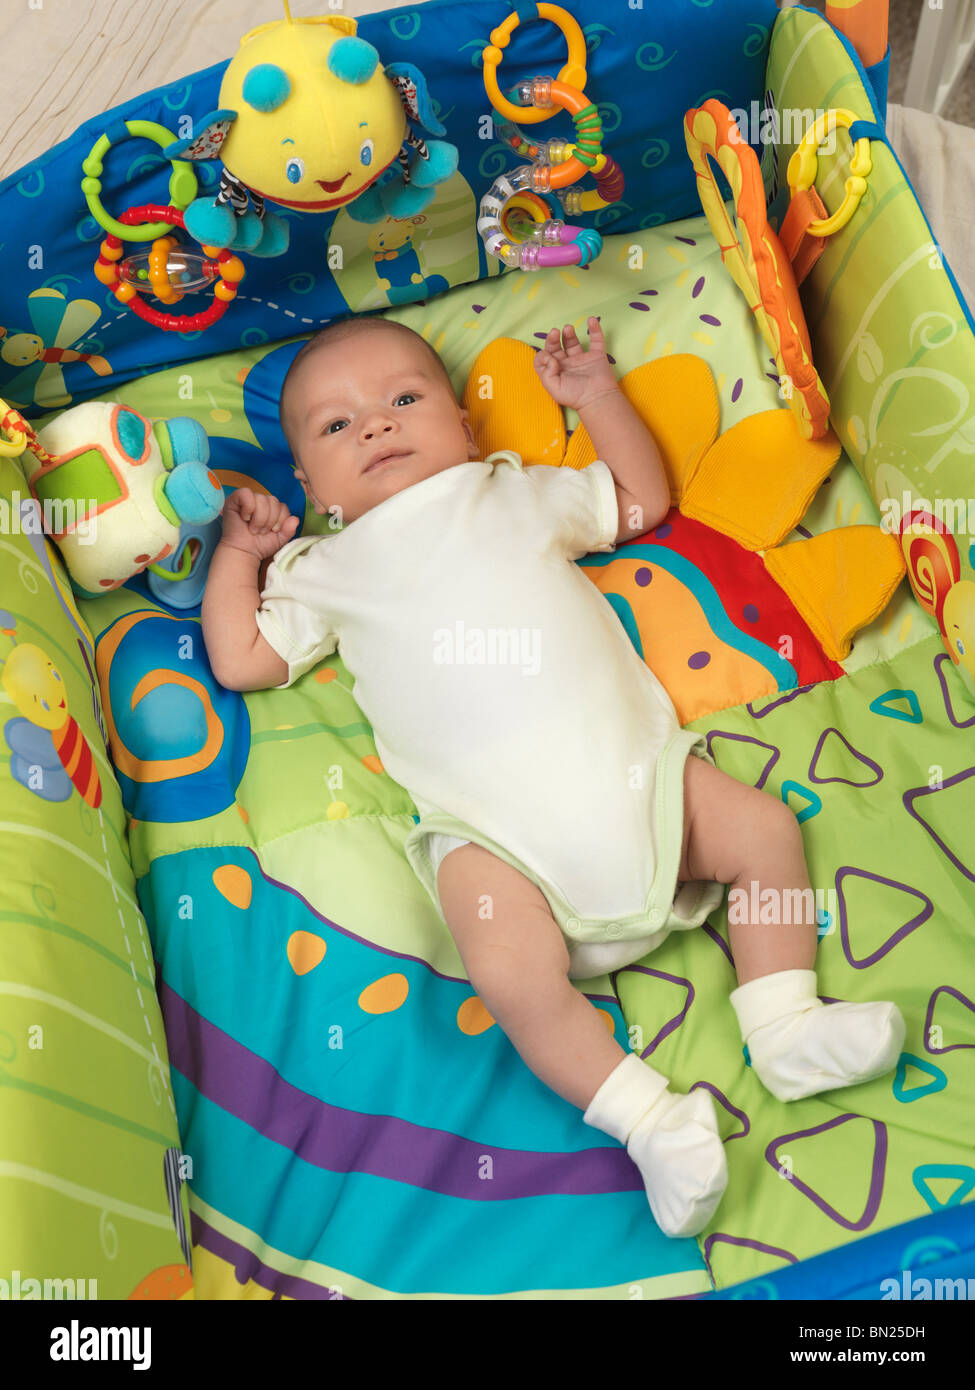 Six week old cute baby boy lying in a colorful play mat with toys Stock Photo